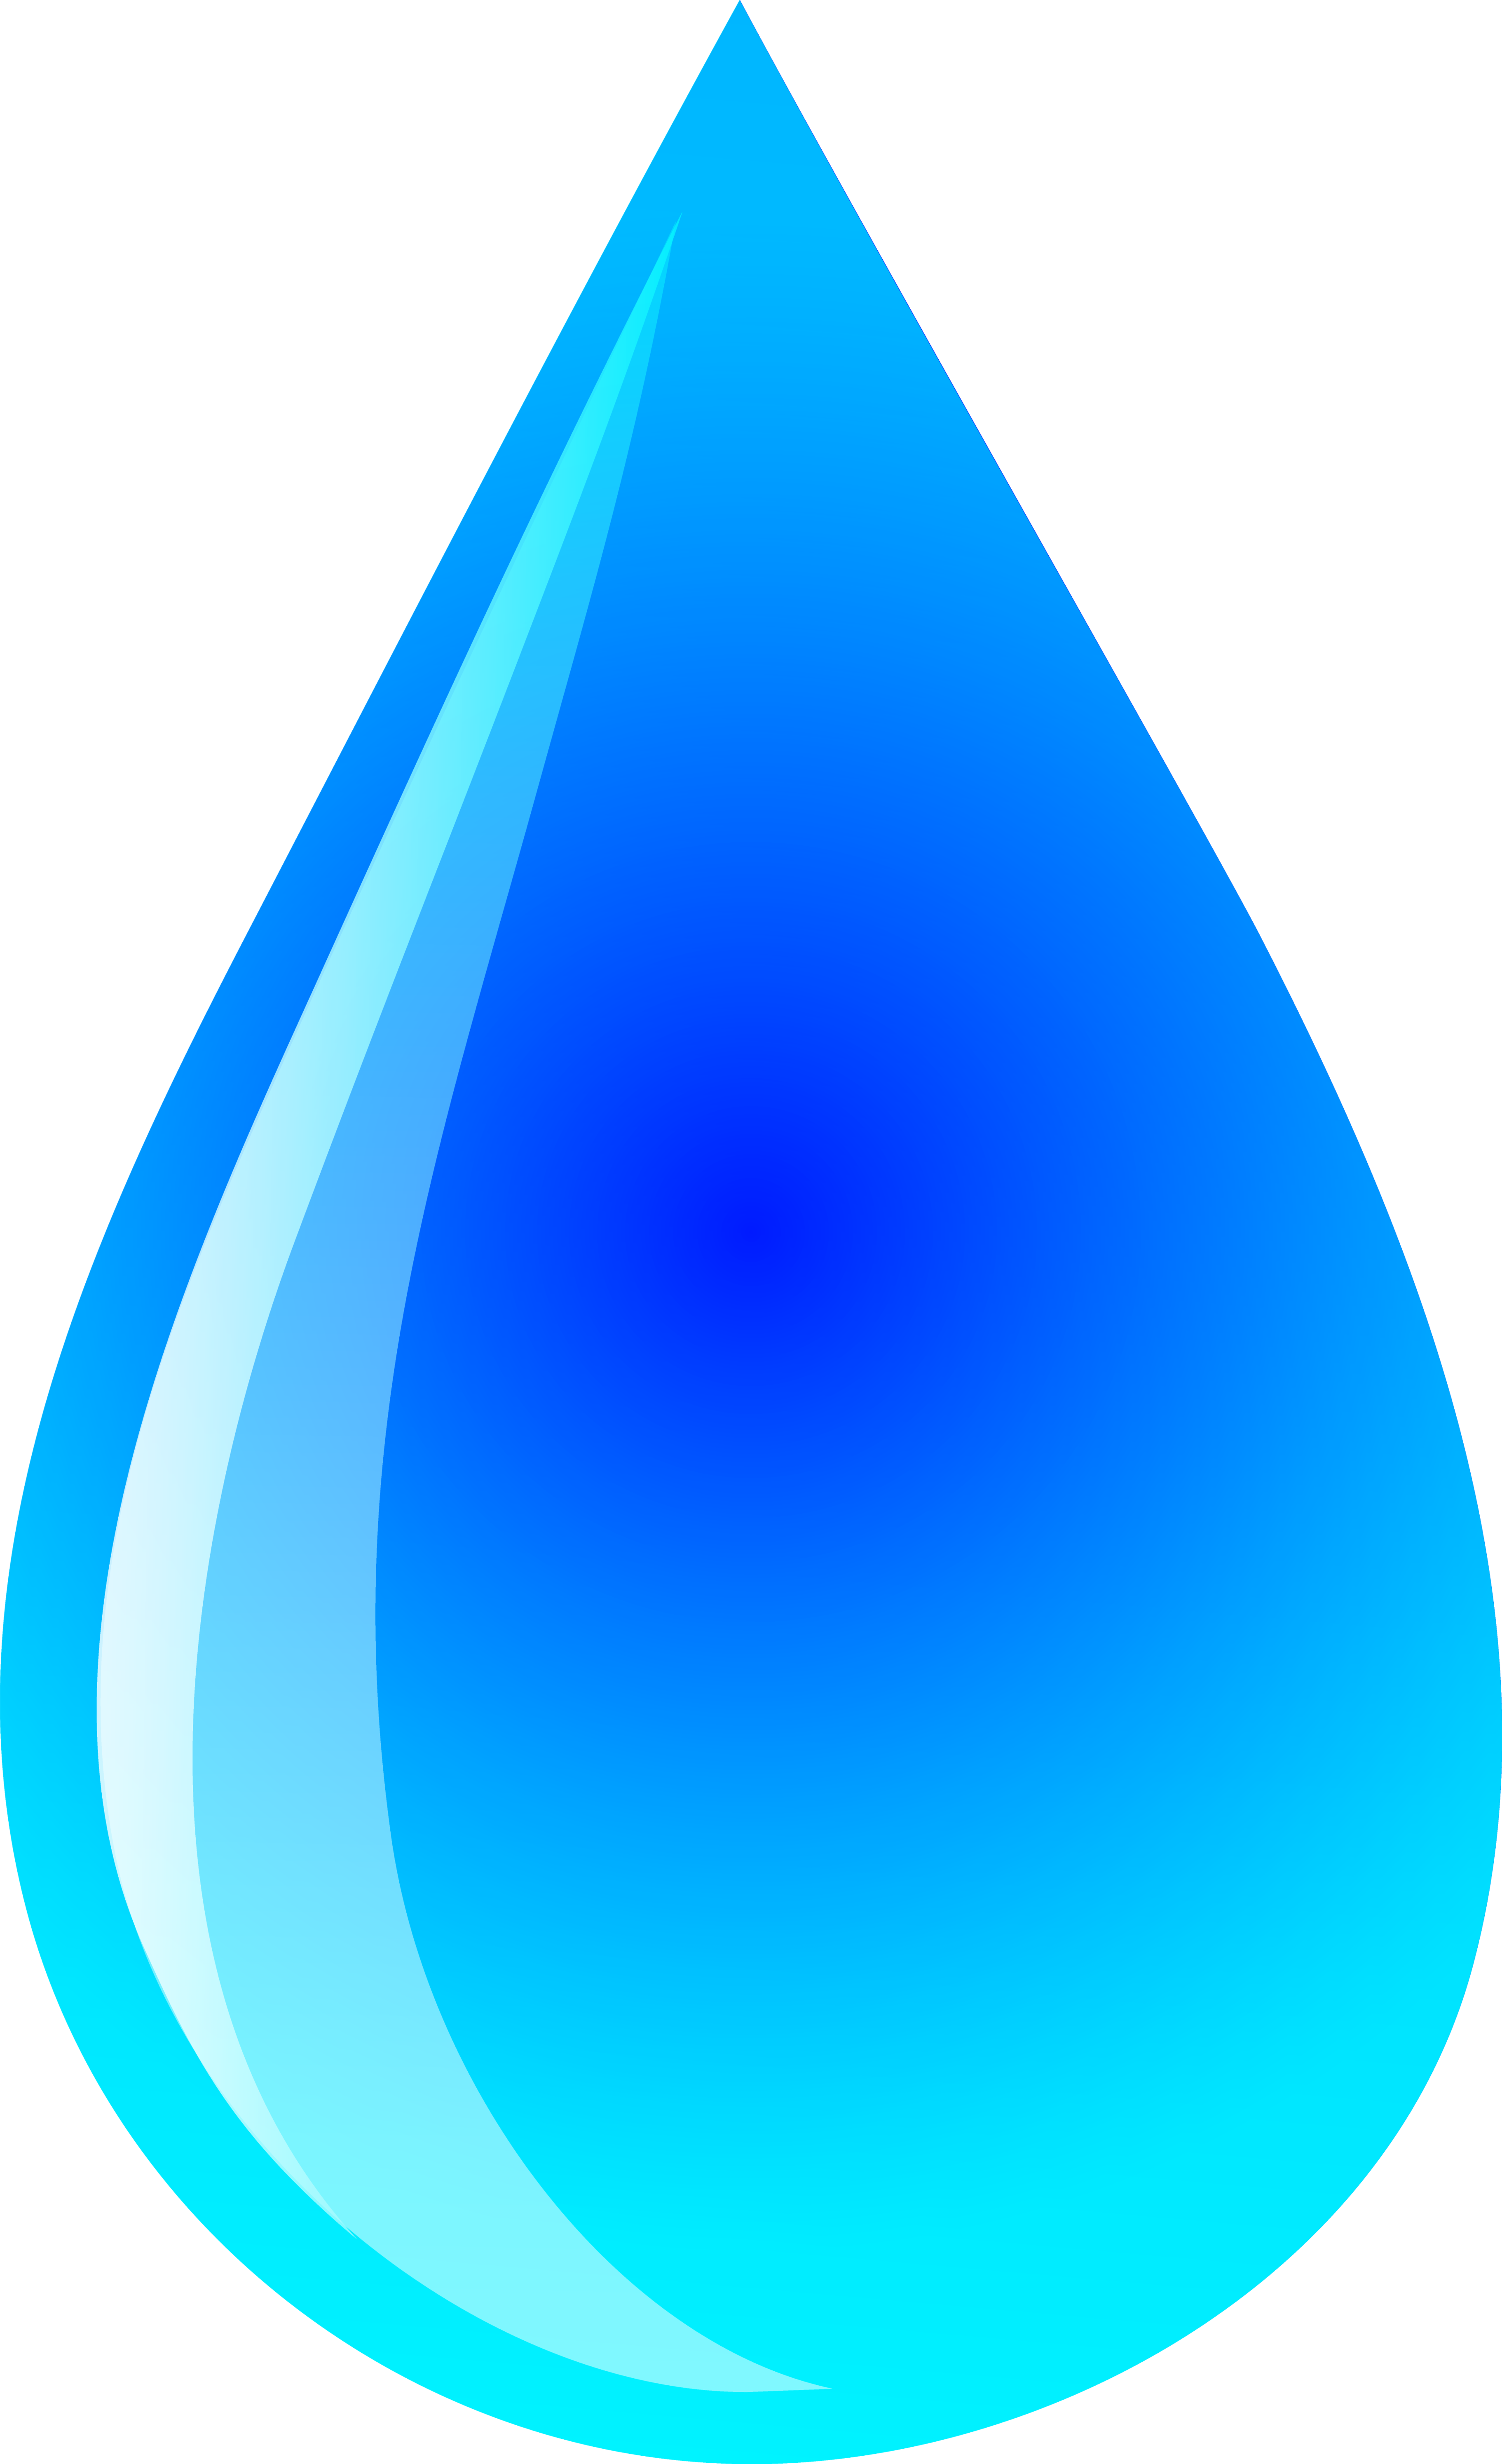 Water Icon Png - ClipArt Best